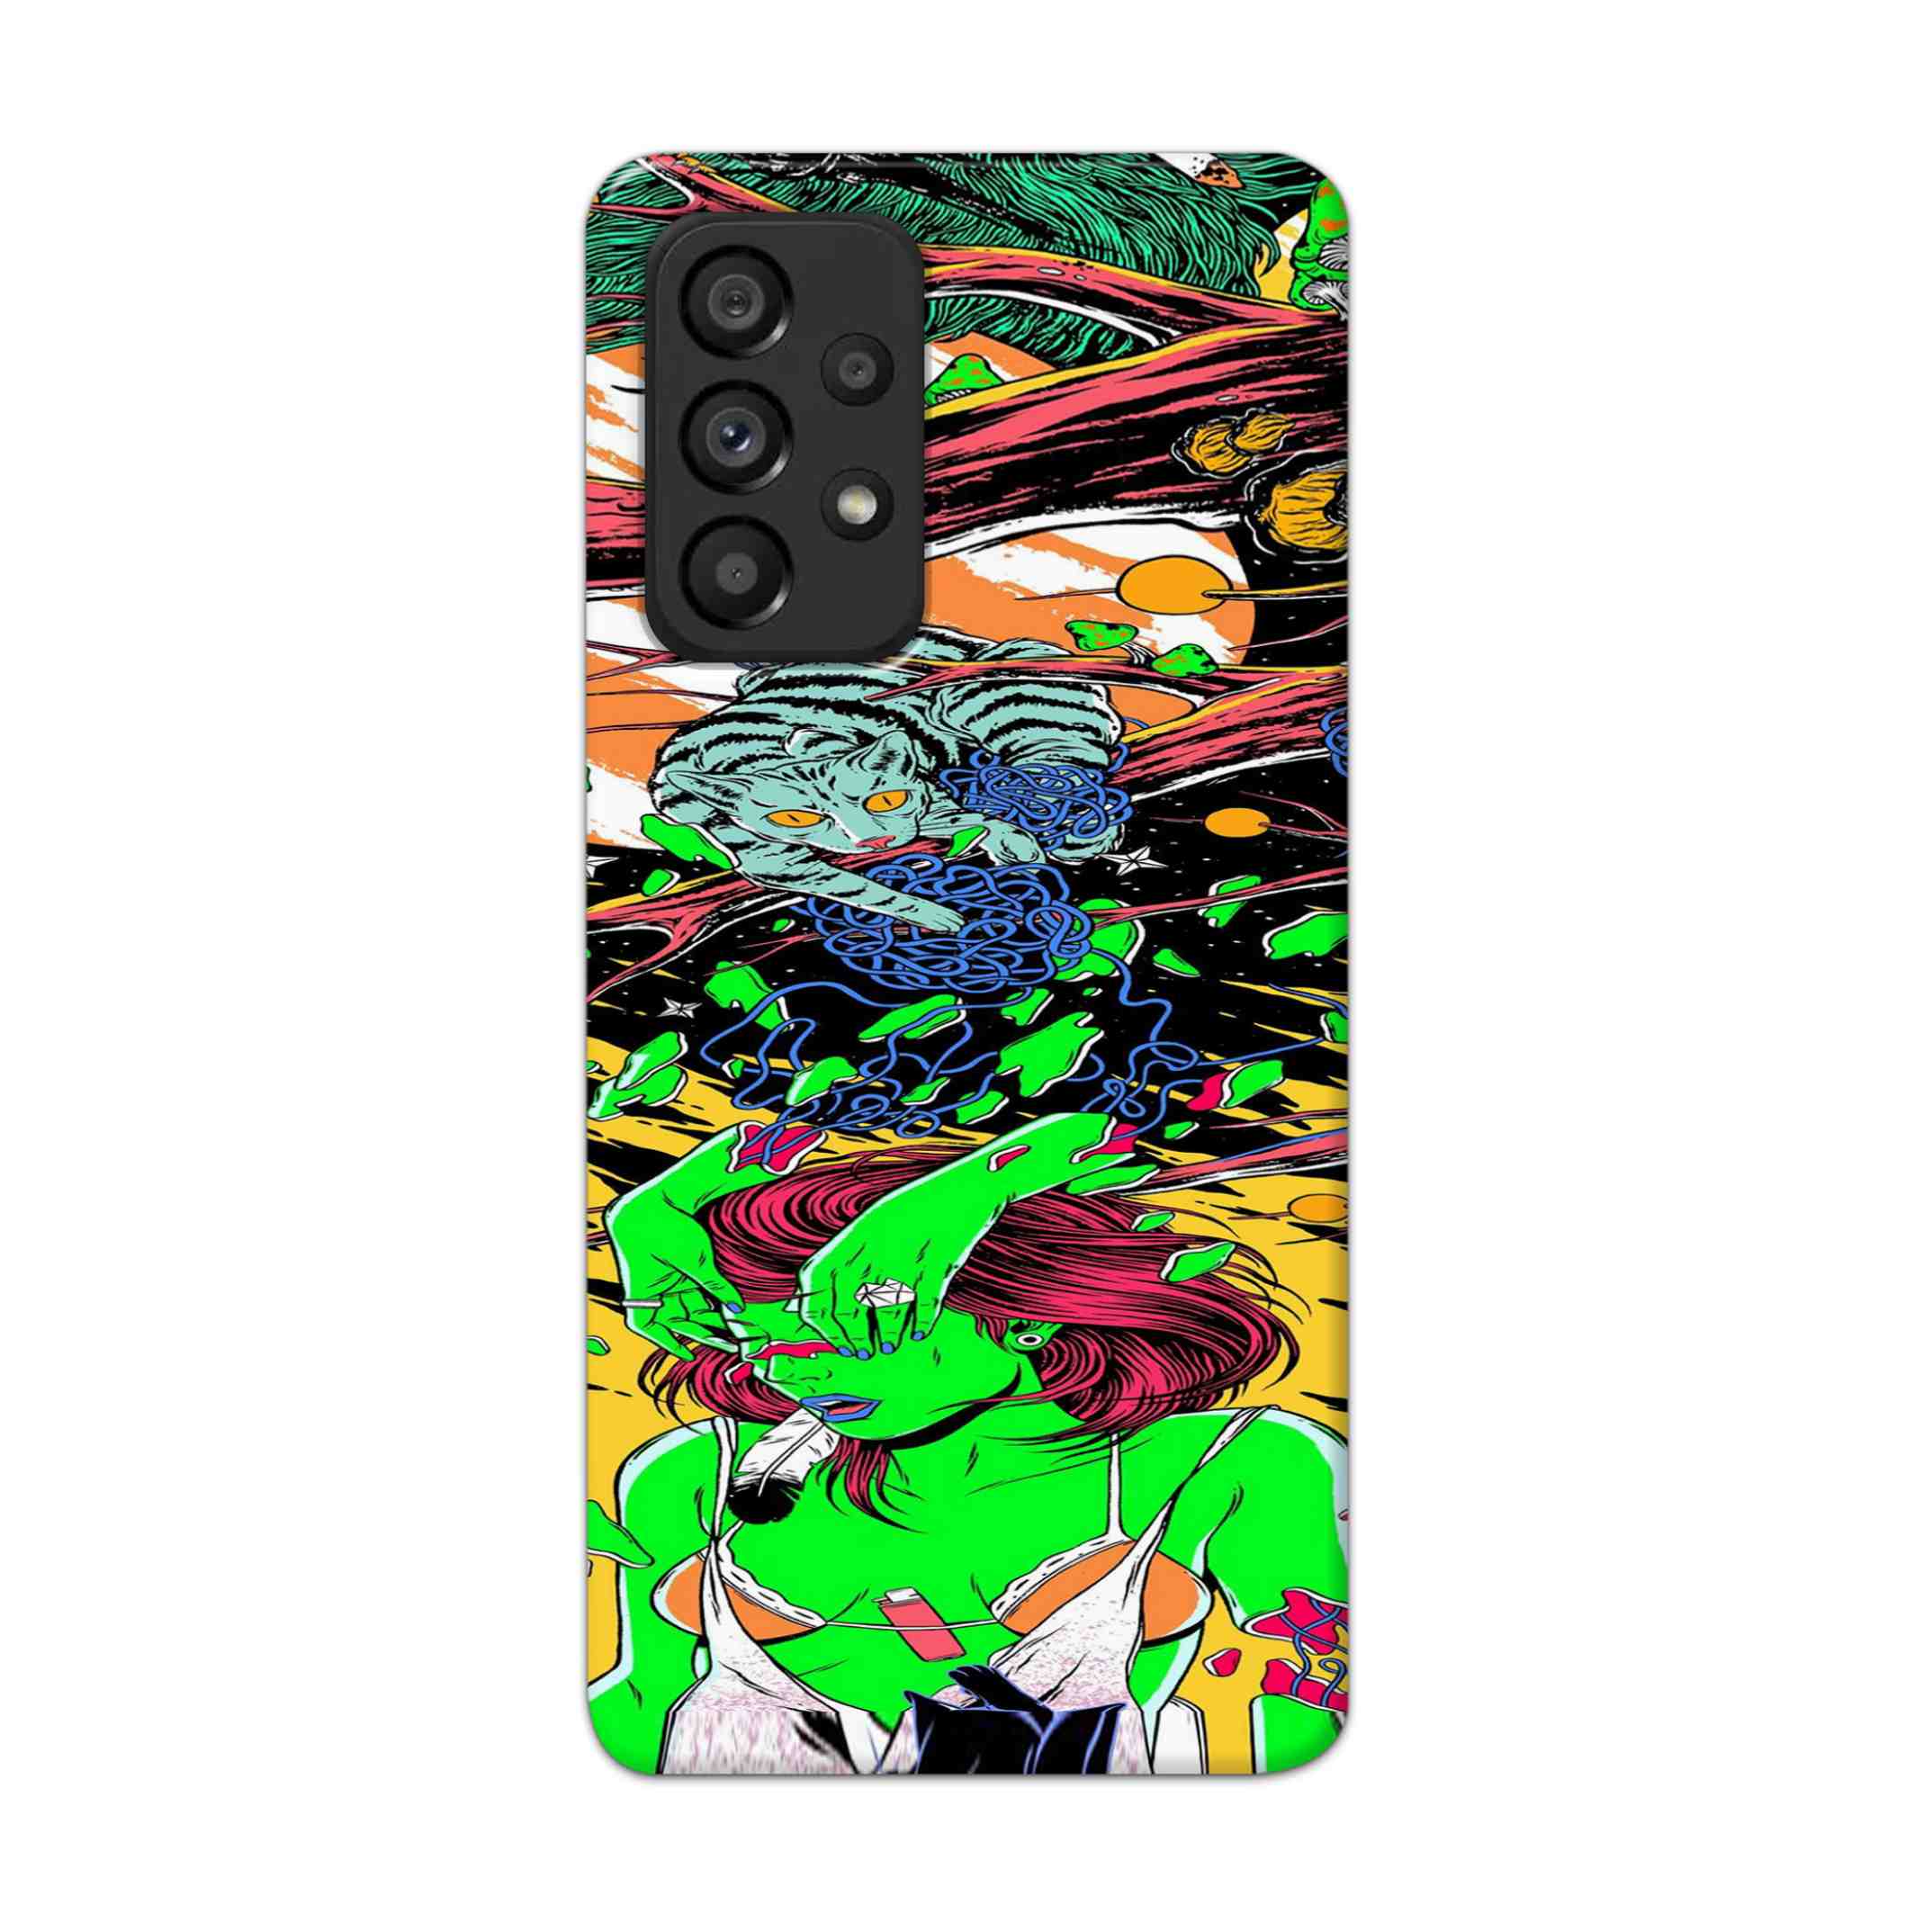 Buy Green Girl Art Hard Back Mobile Phone Case Cover For Samsung Galaxy A53 5G Online